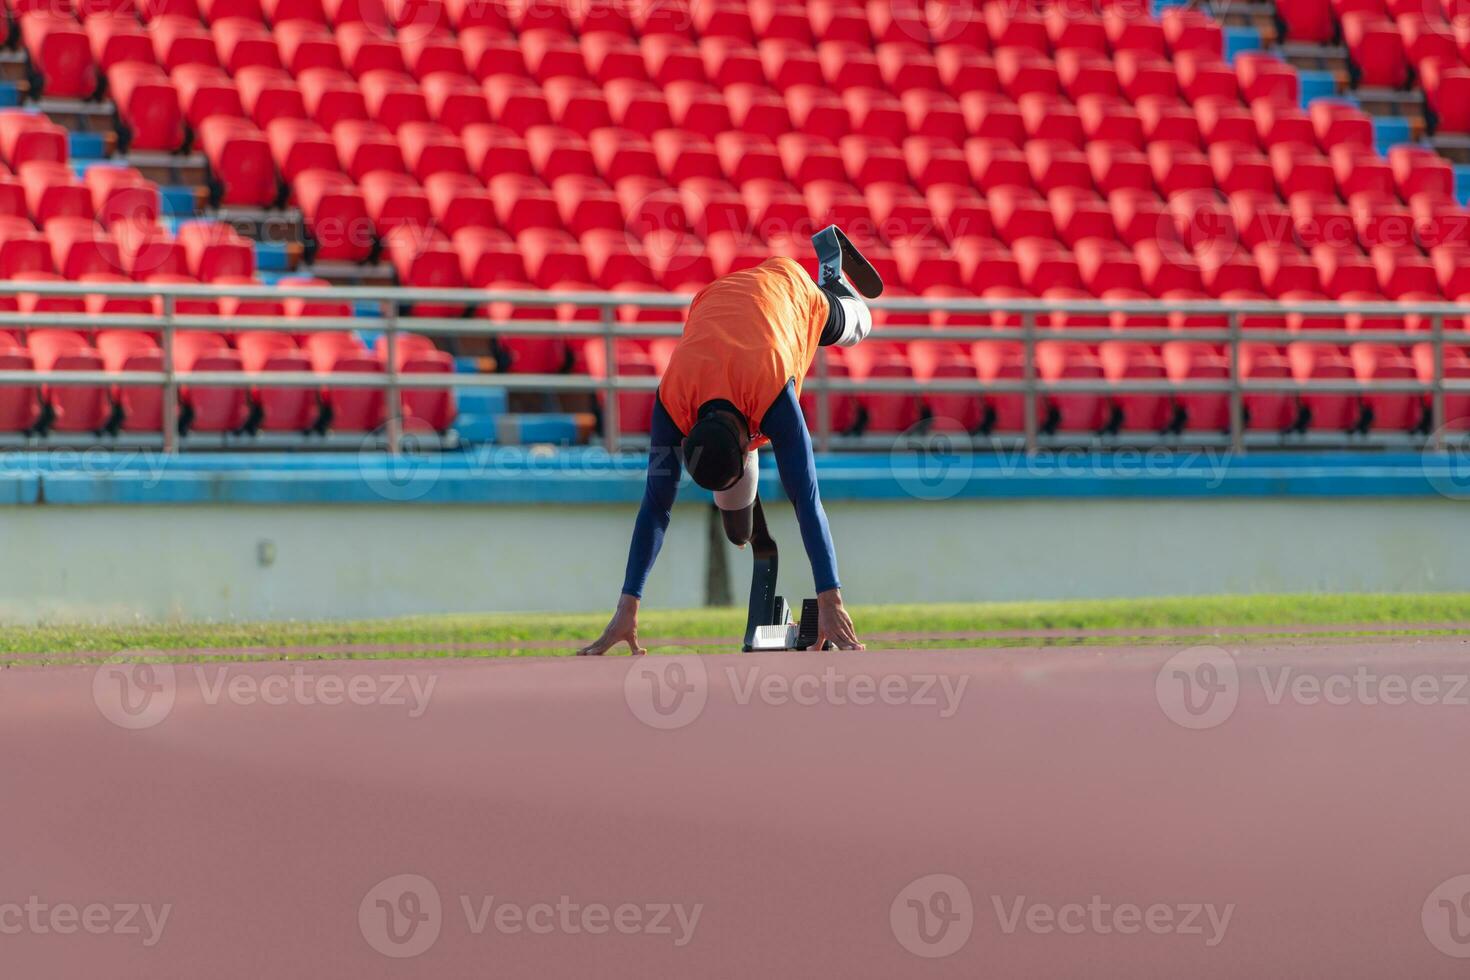 Disabled athletes prepare in starting position ready to run on stadium track photo